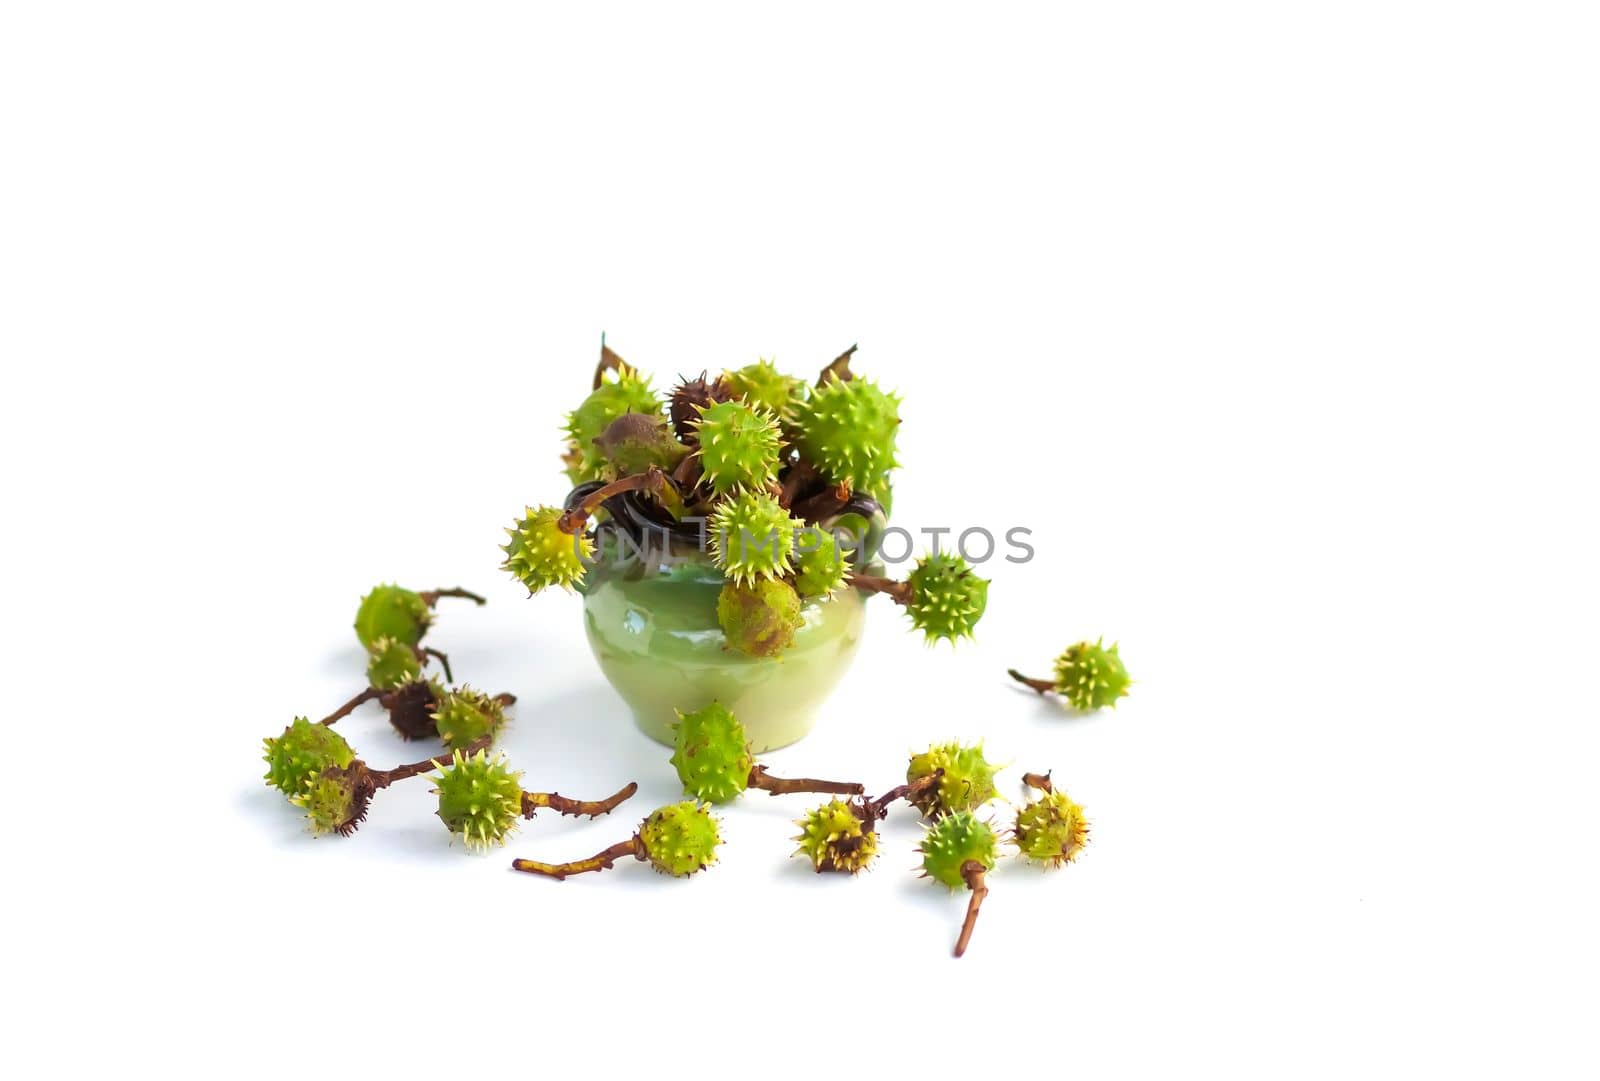 Green Horse chestnuts in a vase.